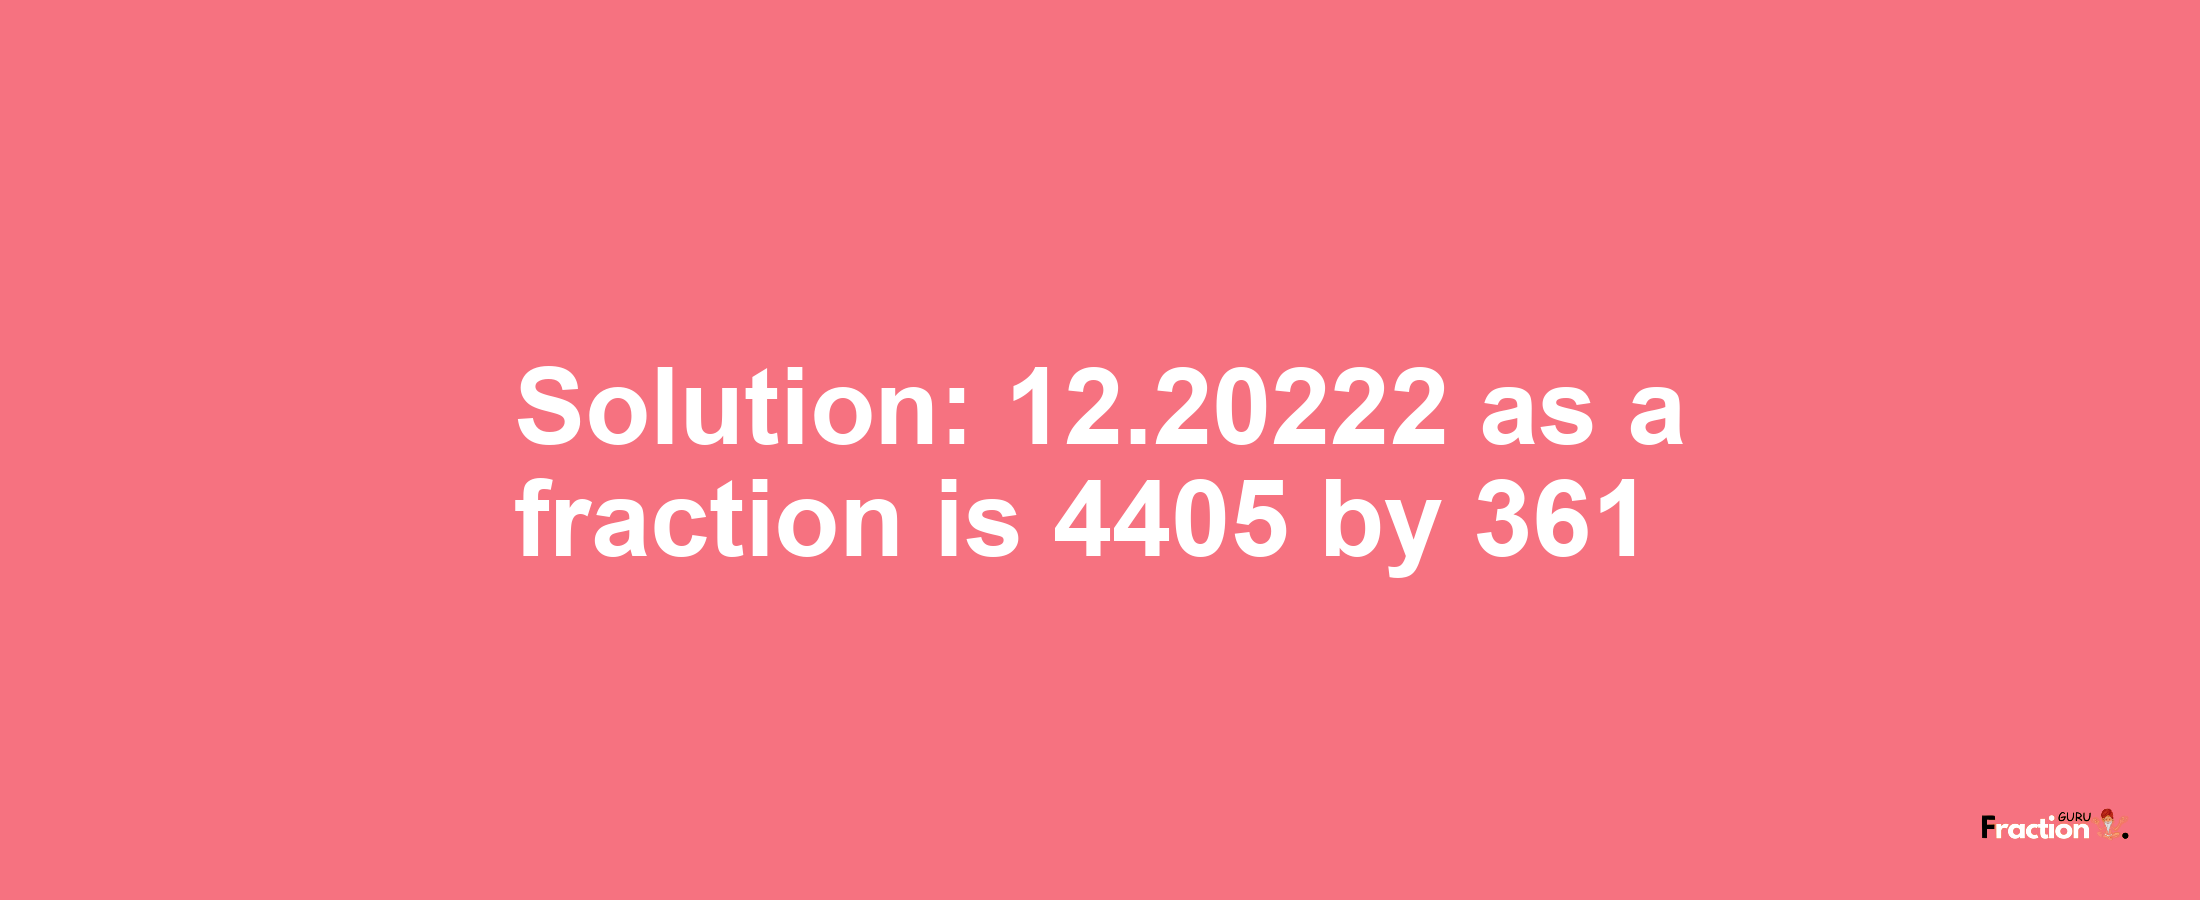 Solution:12.20222 as a fraction is 4405/361